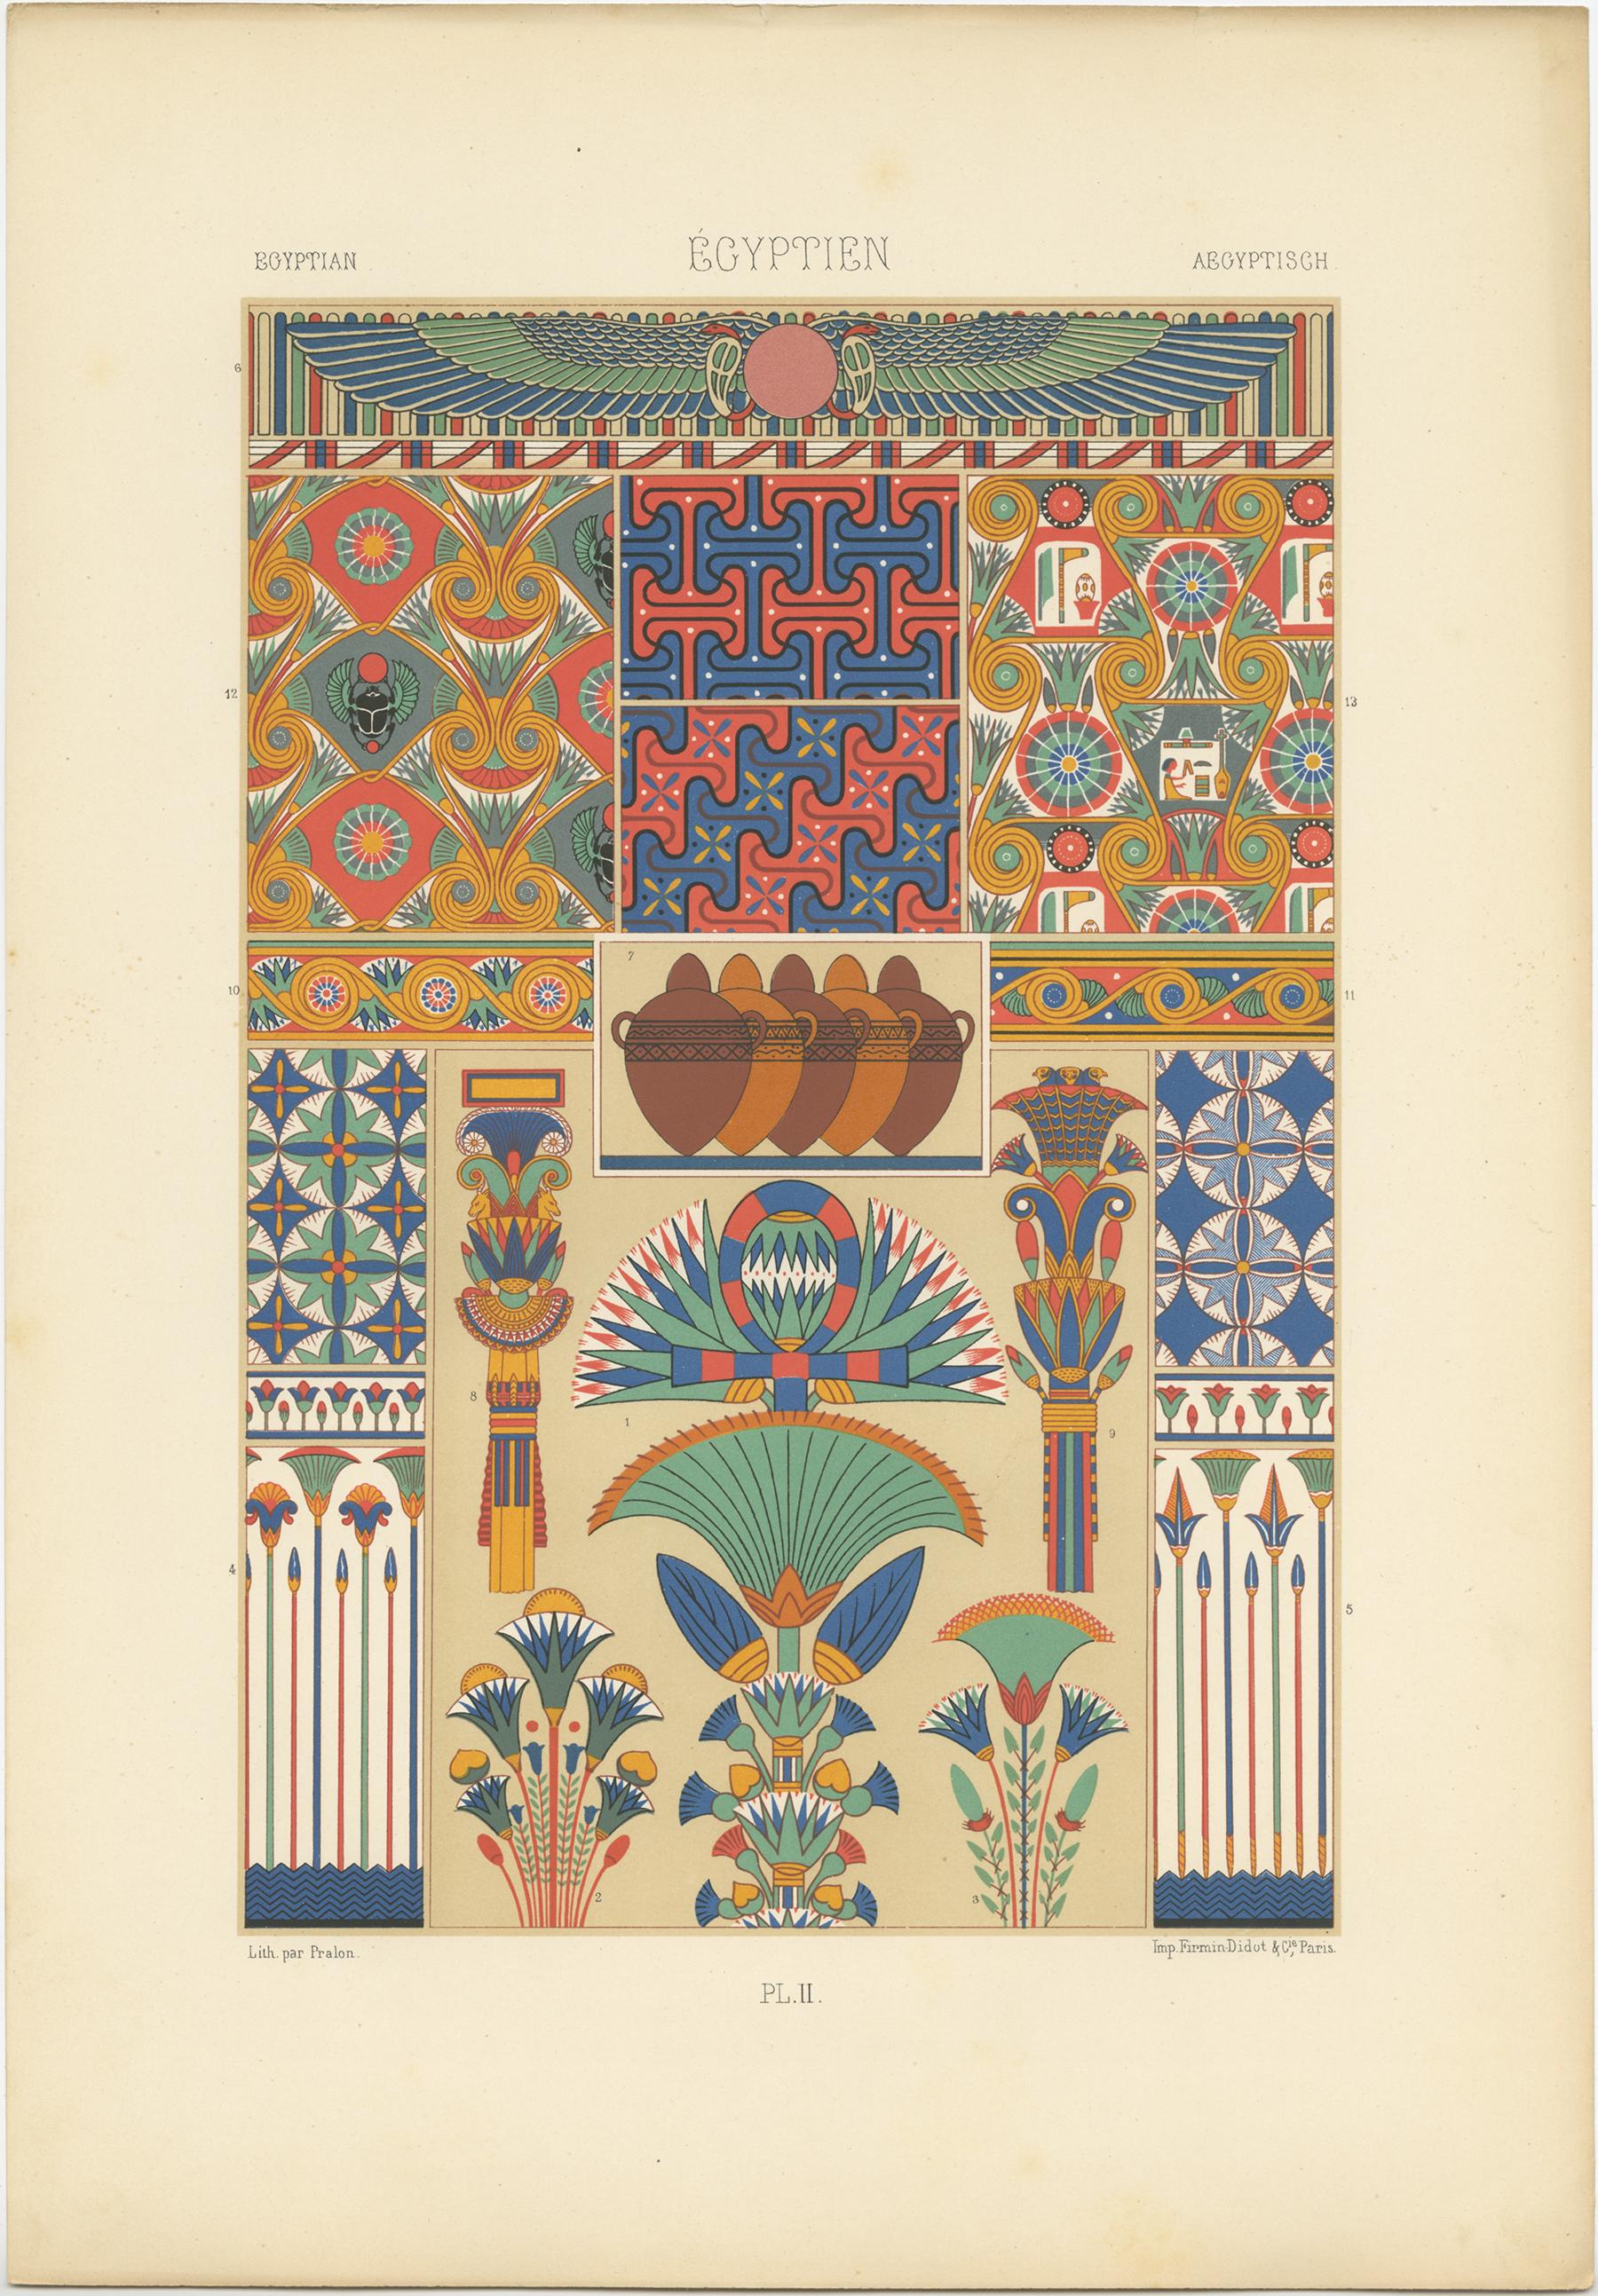 Antique print titled 'Egyptian- Égyptien - Aegyptisch'. Chromolithograph of Egyptian ornaments and decorative arts. This print originates from 'l'Ornement Polychrome' by Auguste Racinet. Published circa 1890.